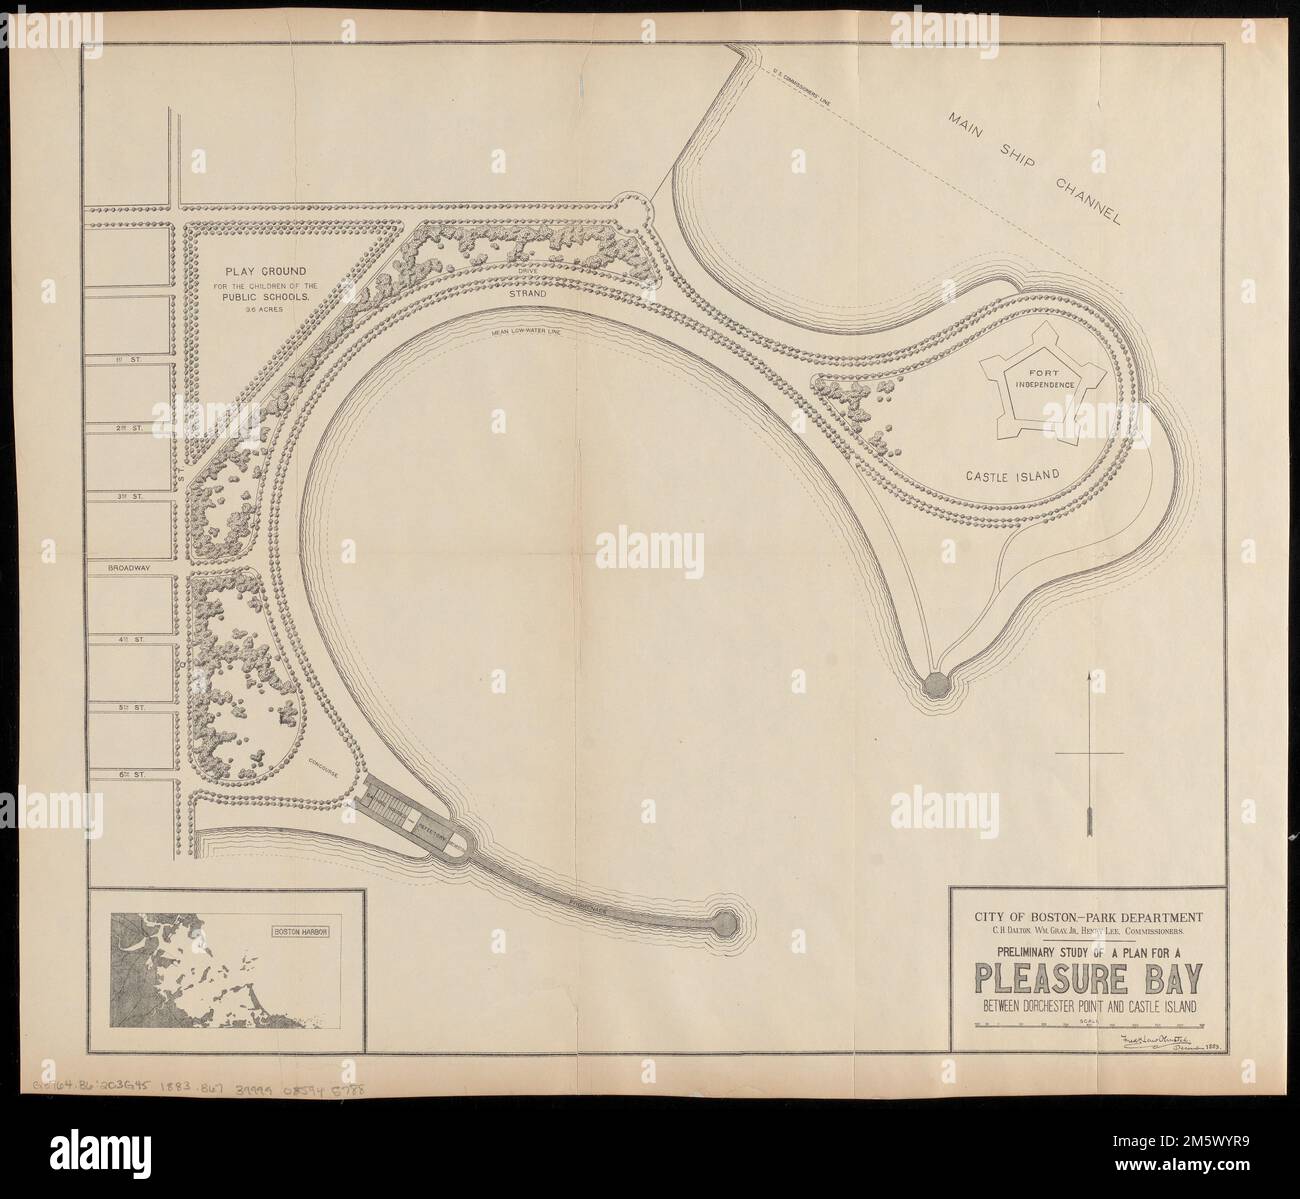 Preliminary study of a plan for a Pleasure Bay between Dorchester Point and Castle Island. Conservation of this piece was funded by an anonymous donor. Inset: Boston Harbor. From City of Boston 9th annual report, 1884.. Olmsted envisioned Marine Park as the final jewel in the Emerald Necklace, linked to Franklin Park by a greenway along Columbia Road. The greenway was never constructed and Marine Park remains disconnected from the park system. However, the City of Boston has proposed a green link along Columbia Road to realize Olmsted’s vision. Shown here, Olmsted’s plan expanded City Point, s Stock Photo